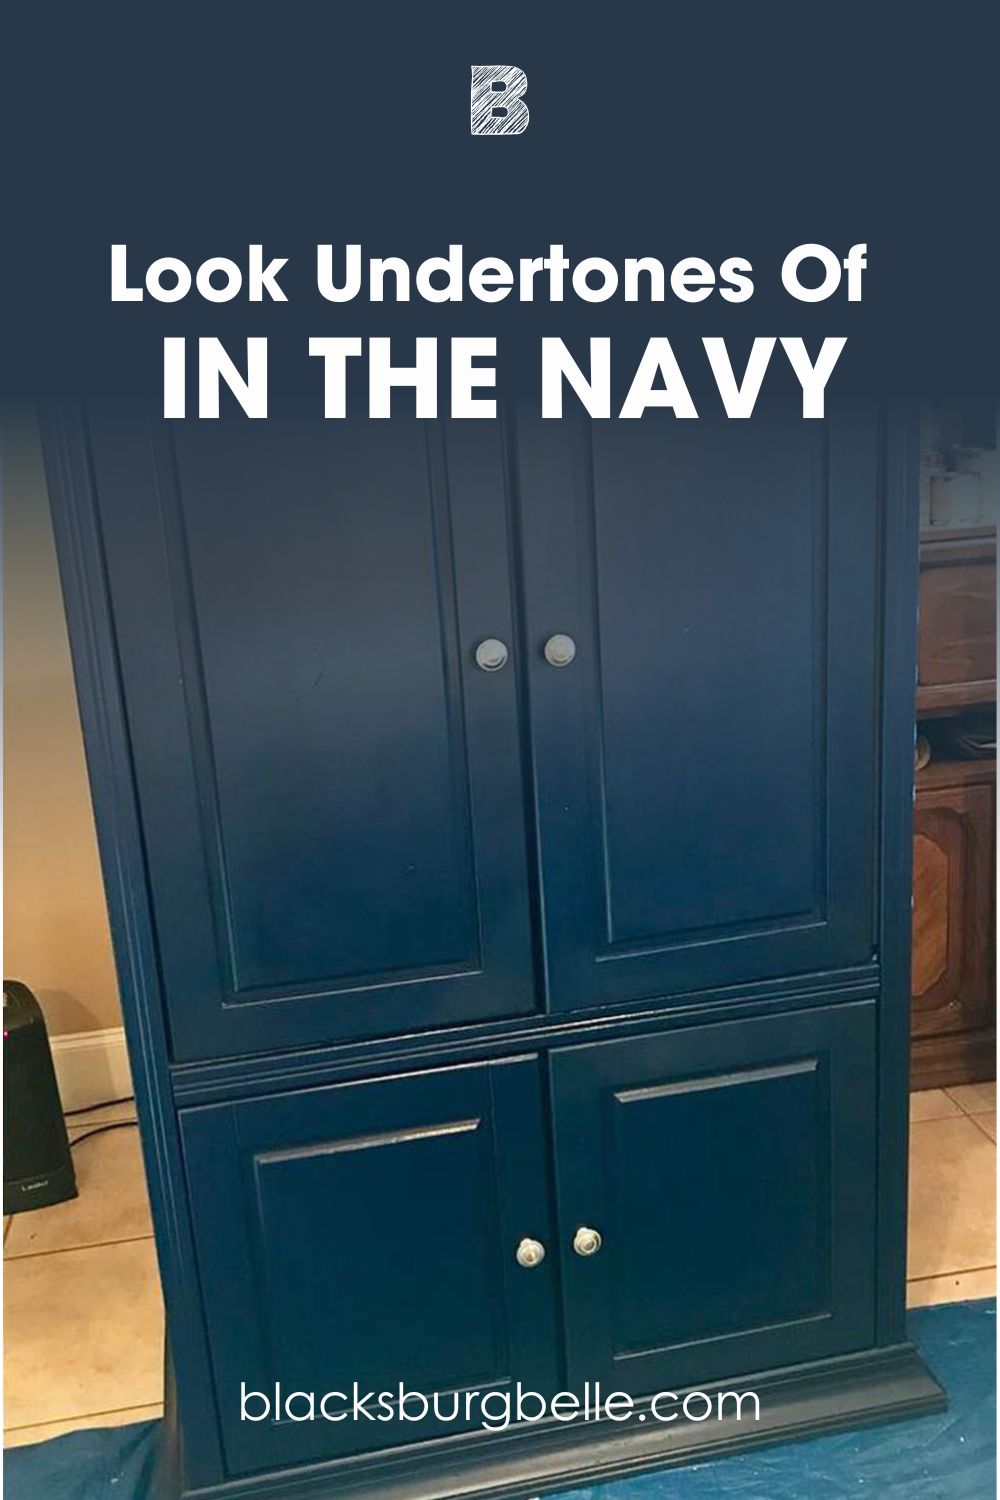 A Closer Look at the Undertones in IN THE NAVY